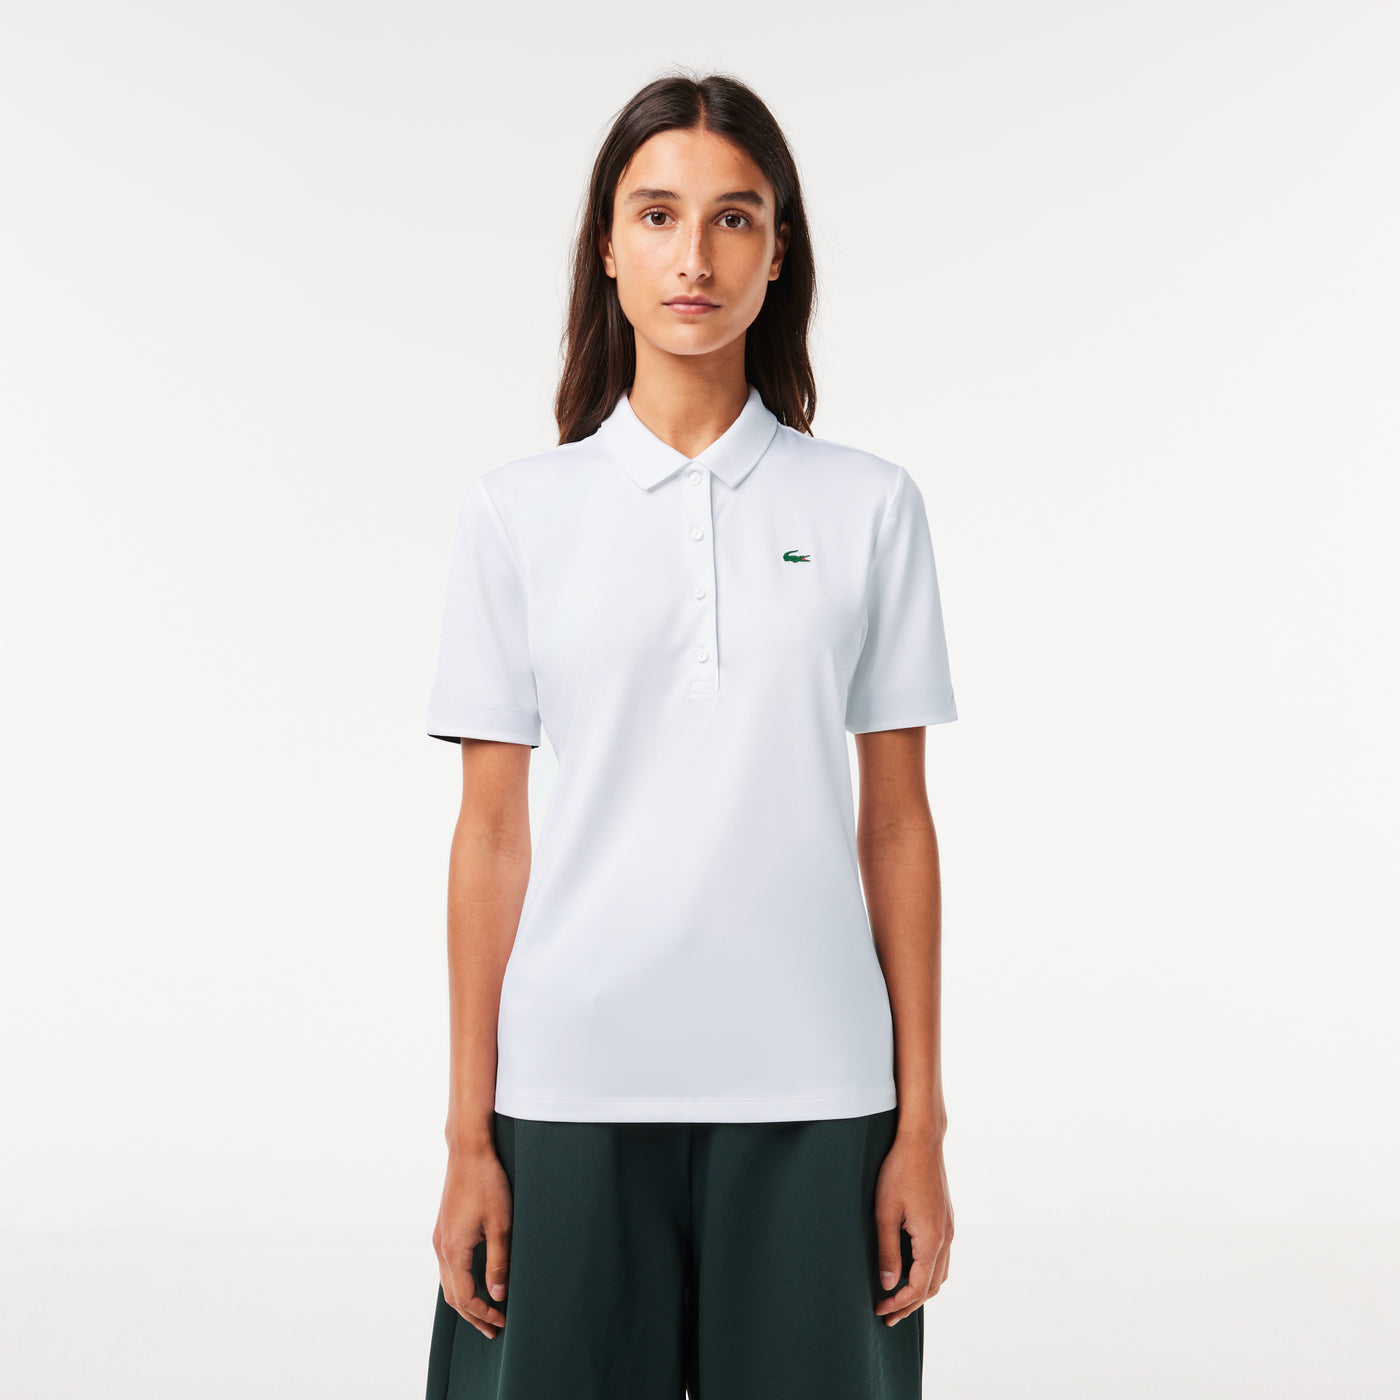 Shop The Latest Collection Of Lacoste Women'S Lacoste Sport Breathable Stretch Golf Polo Shirt - Pf5179 In Lebanon